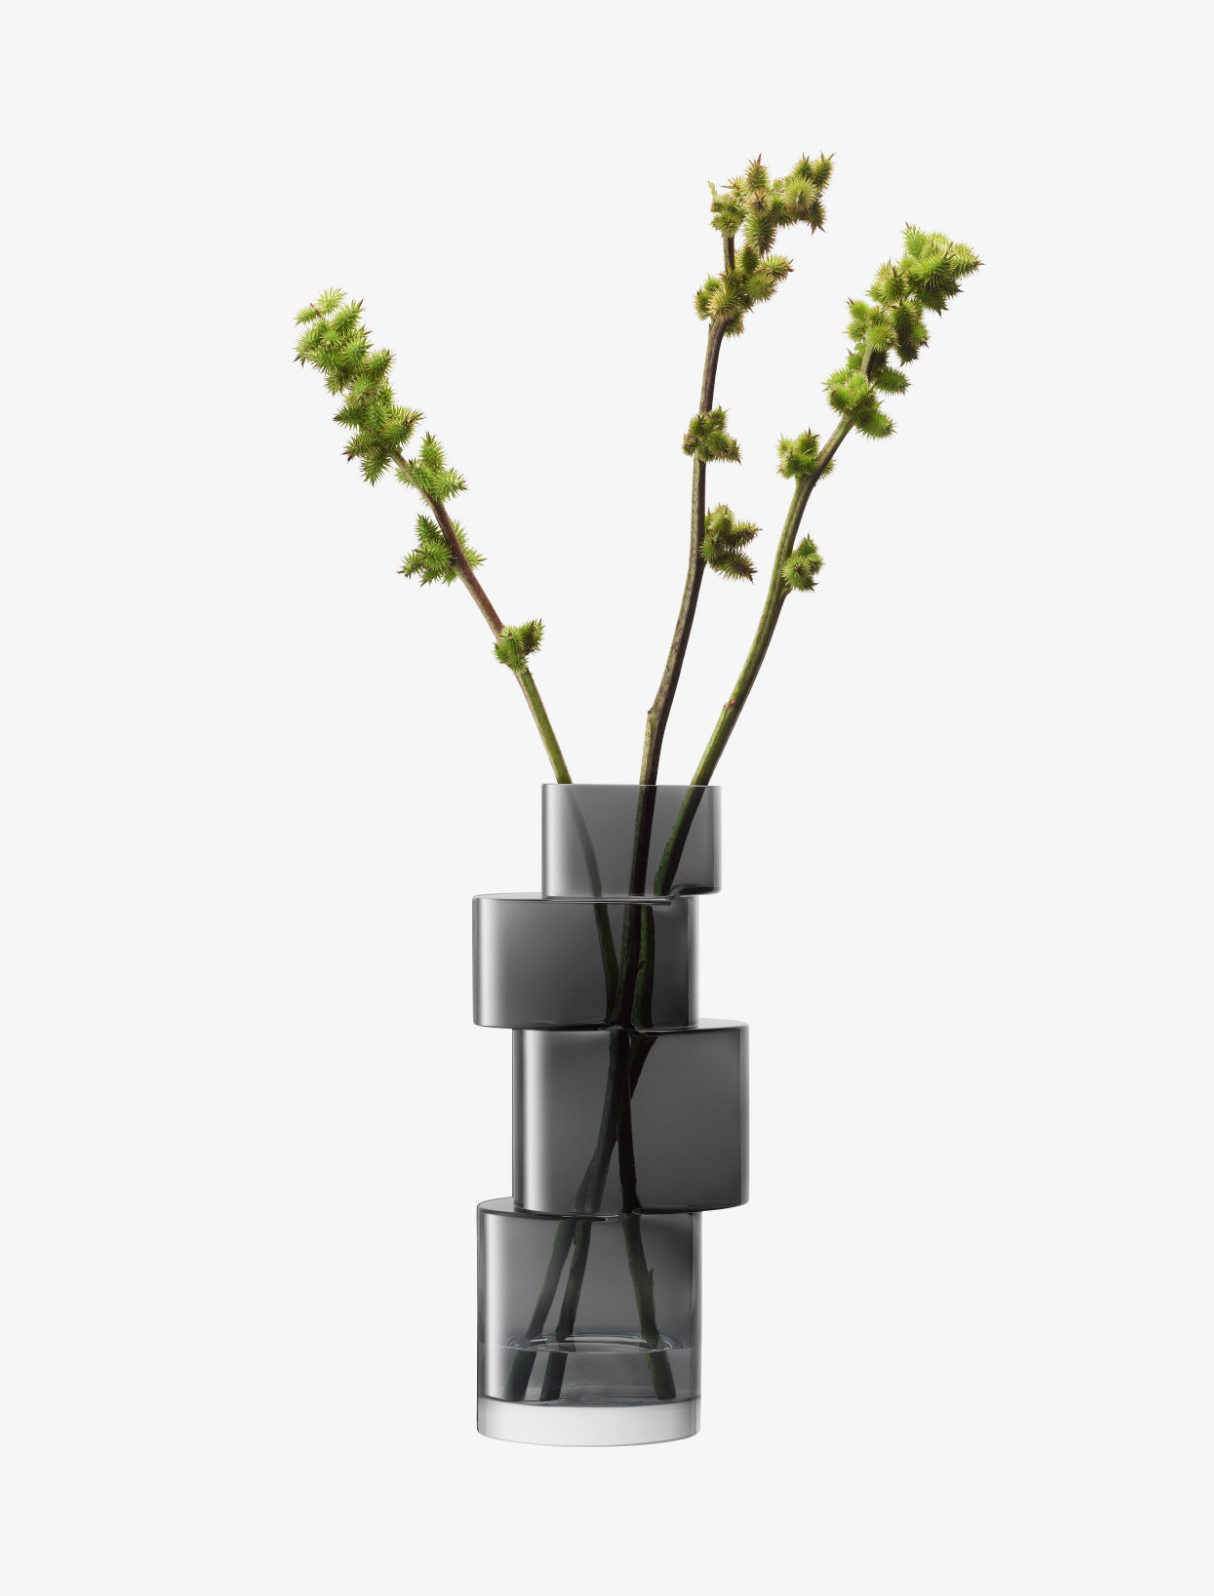 VASE CUBE SHAPED SLATE GREY (Available in 2 Sizes)